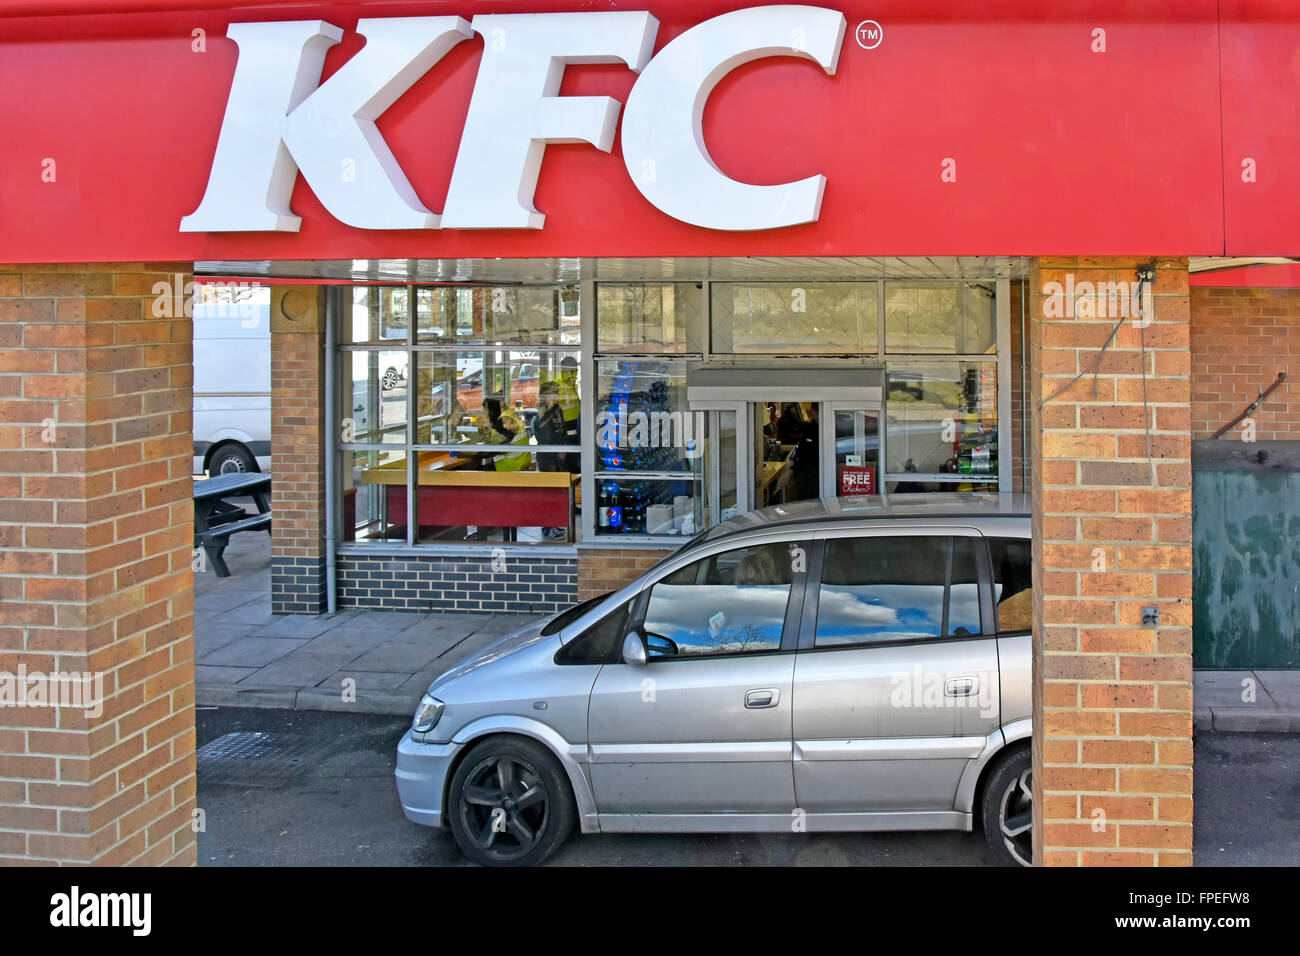 Kentucky Fried Chicken fast food restaurant drive through option &  customer sitting in car at ordering payment window below large KFC logo sign UK Stock Photo